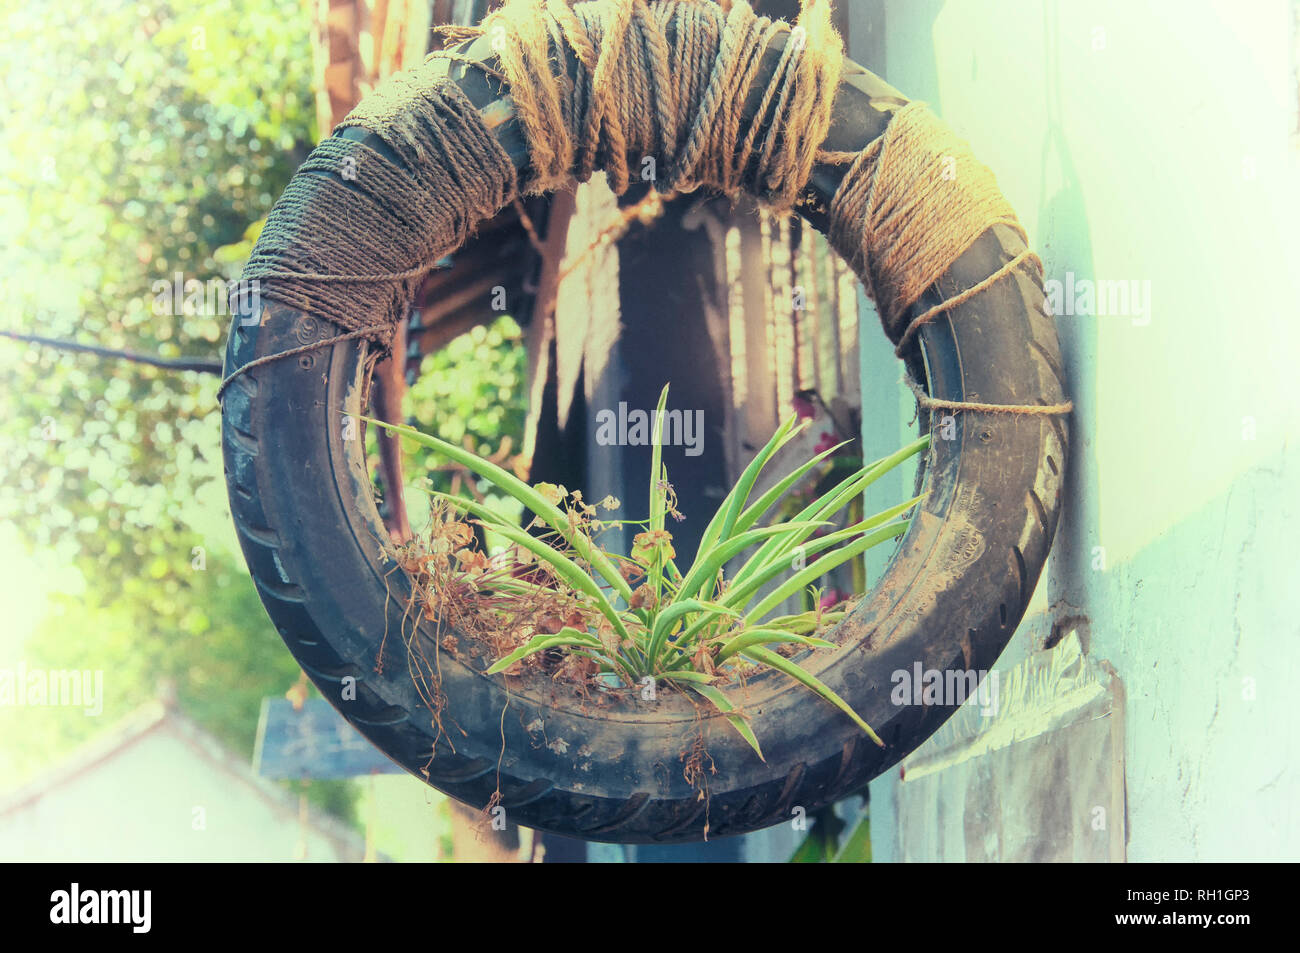 An old tire converted into a hanging plater with a spider plant inside within the Luzhi scenic area in Wuzhong China on a sunny day. Stock Photo